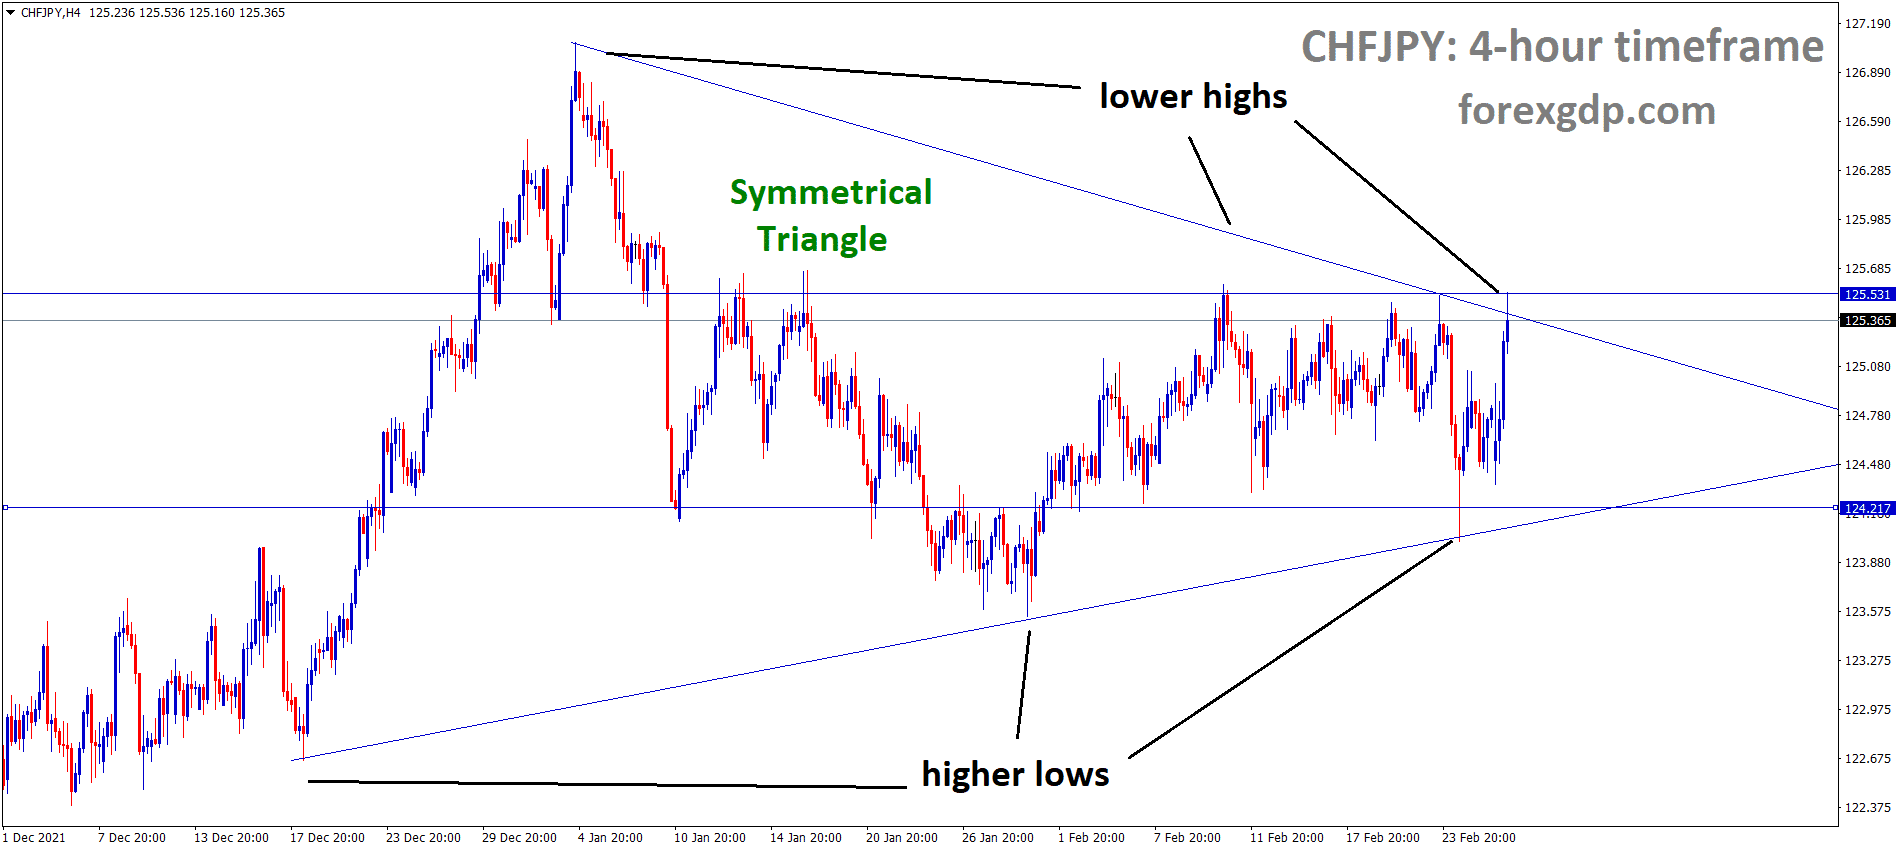 CHFJPY is moving in the Symmetrical triangle pattern and the market has reached the Top area of the pattern 1